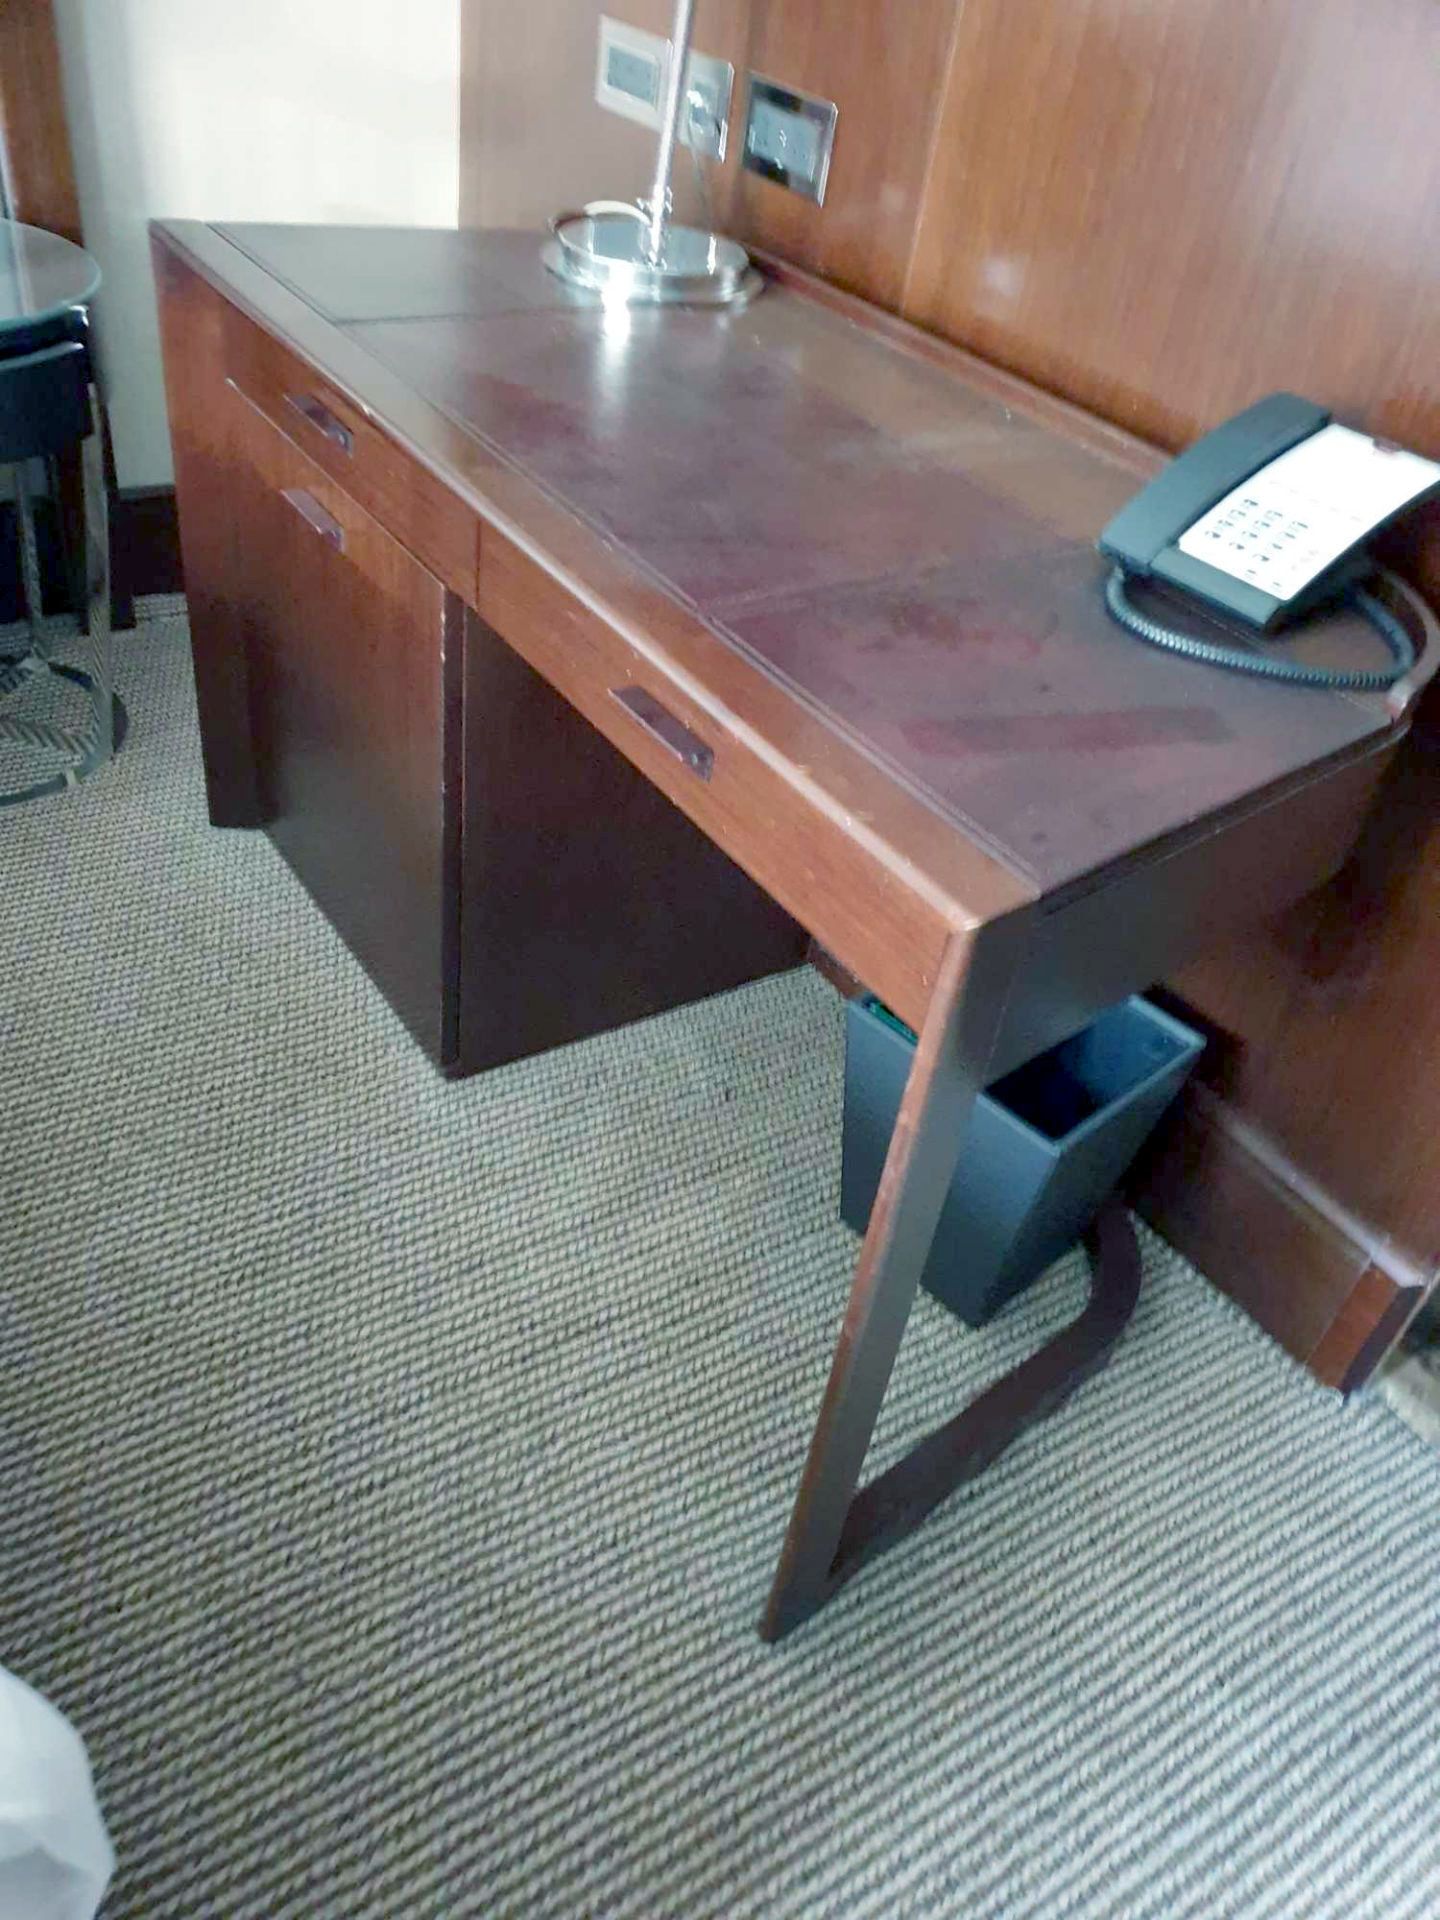 Walnut Veneer Desk By David Salmon Operational Drawers And cupboard for a room Dometic Minibar Hipro - Image 2 of 2